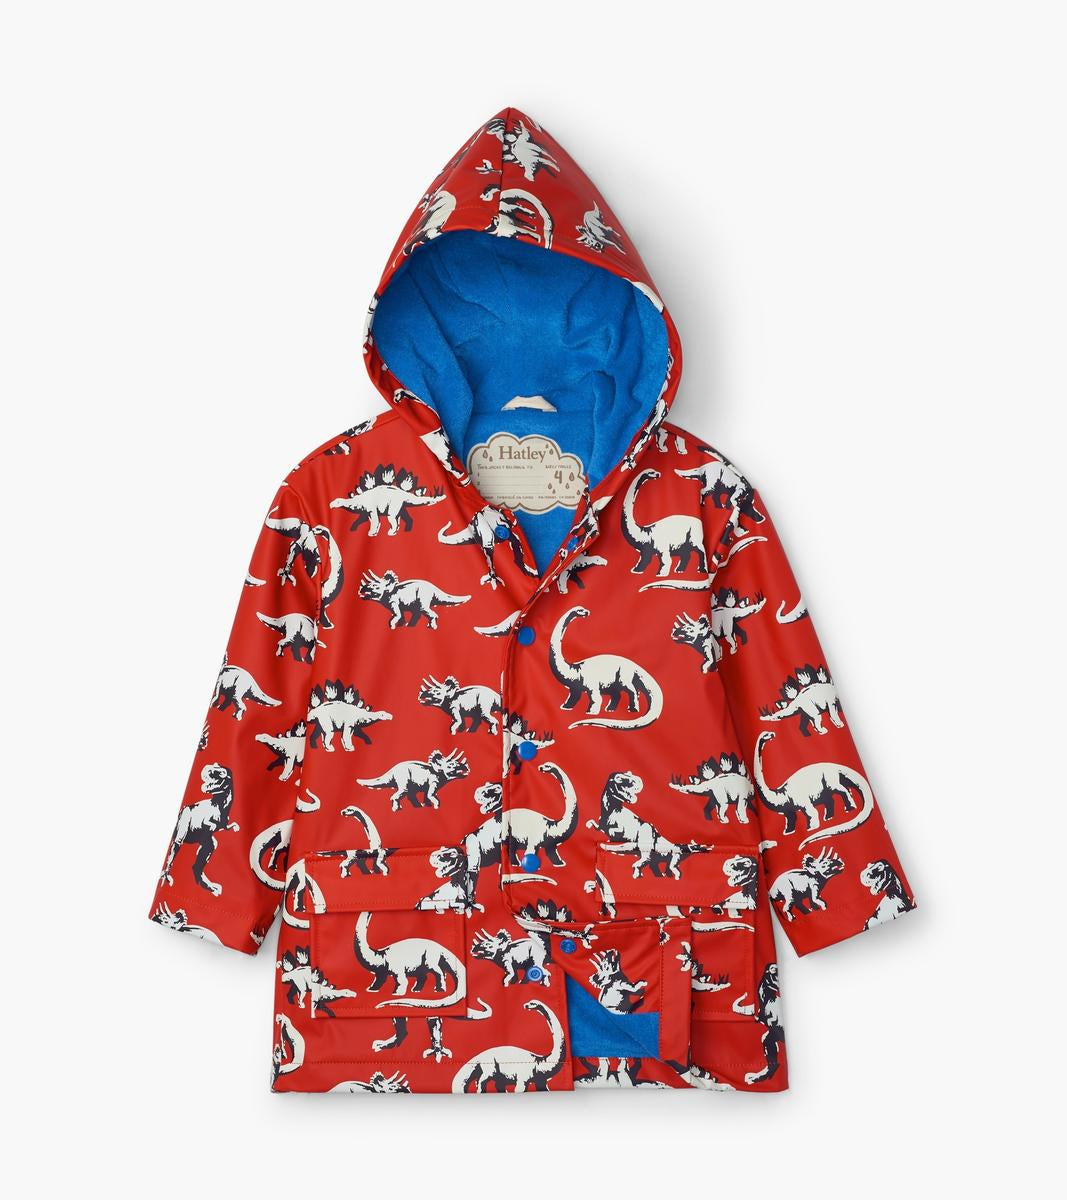 Hatley - Raincoat - Colour Changing Painted Dinos